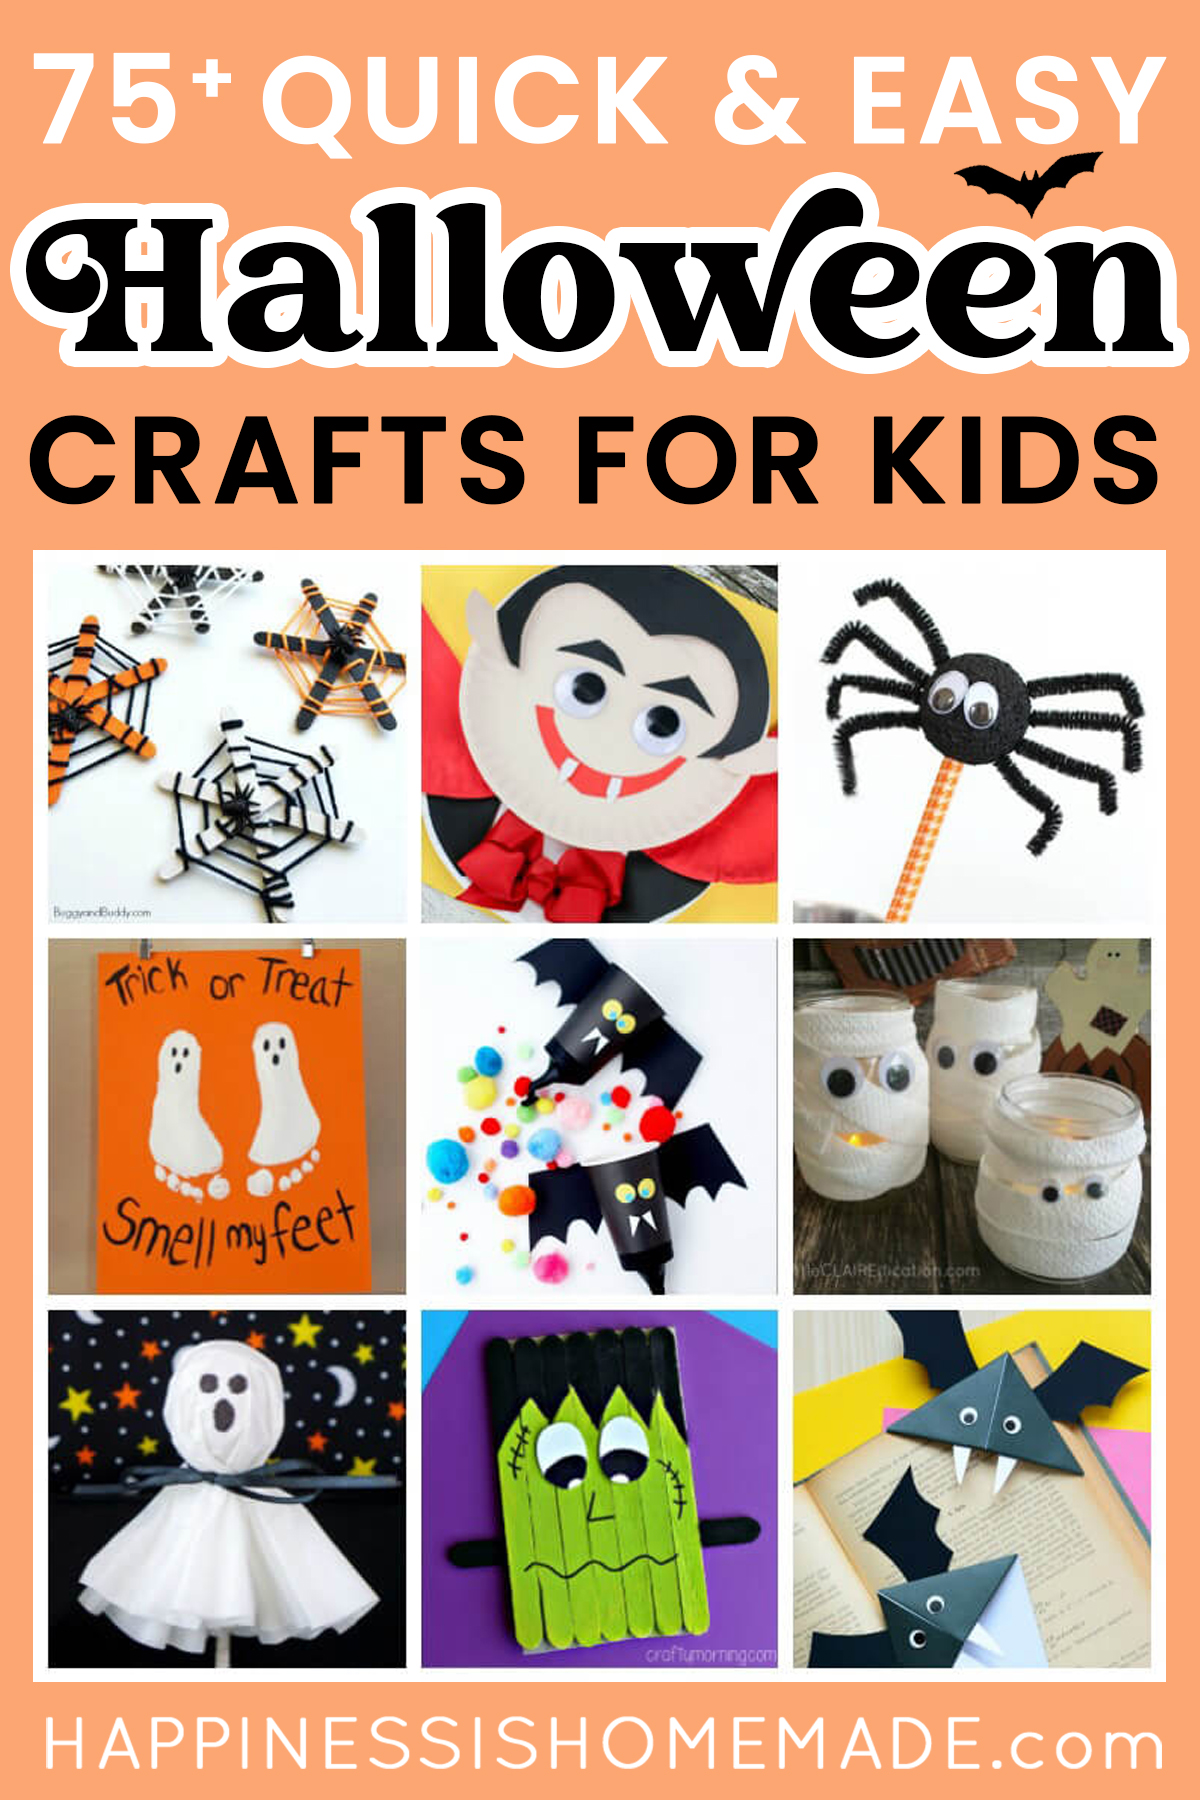 21 Crafts for Teens and Tweens - The Crafting Chicks